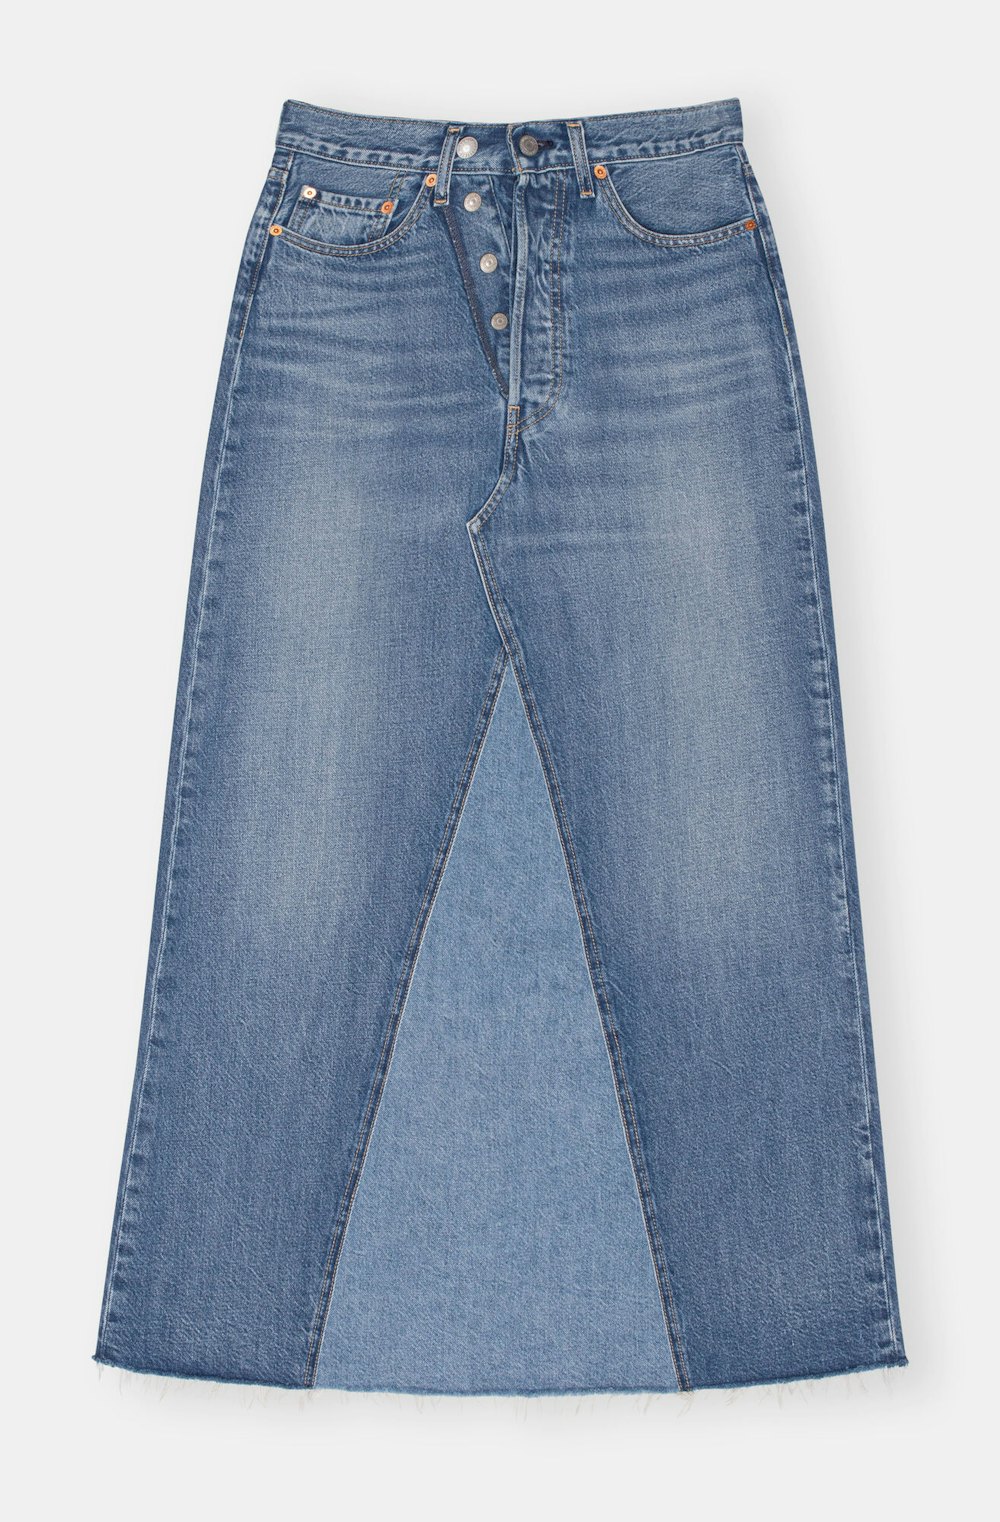 Denim Skirts End 2022 on a High (and Long) Note